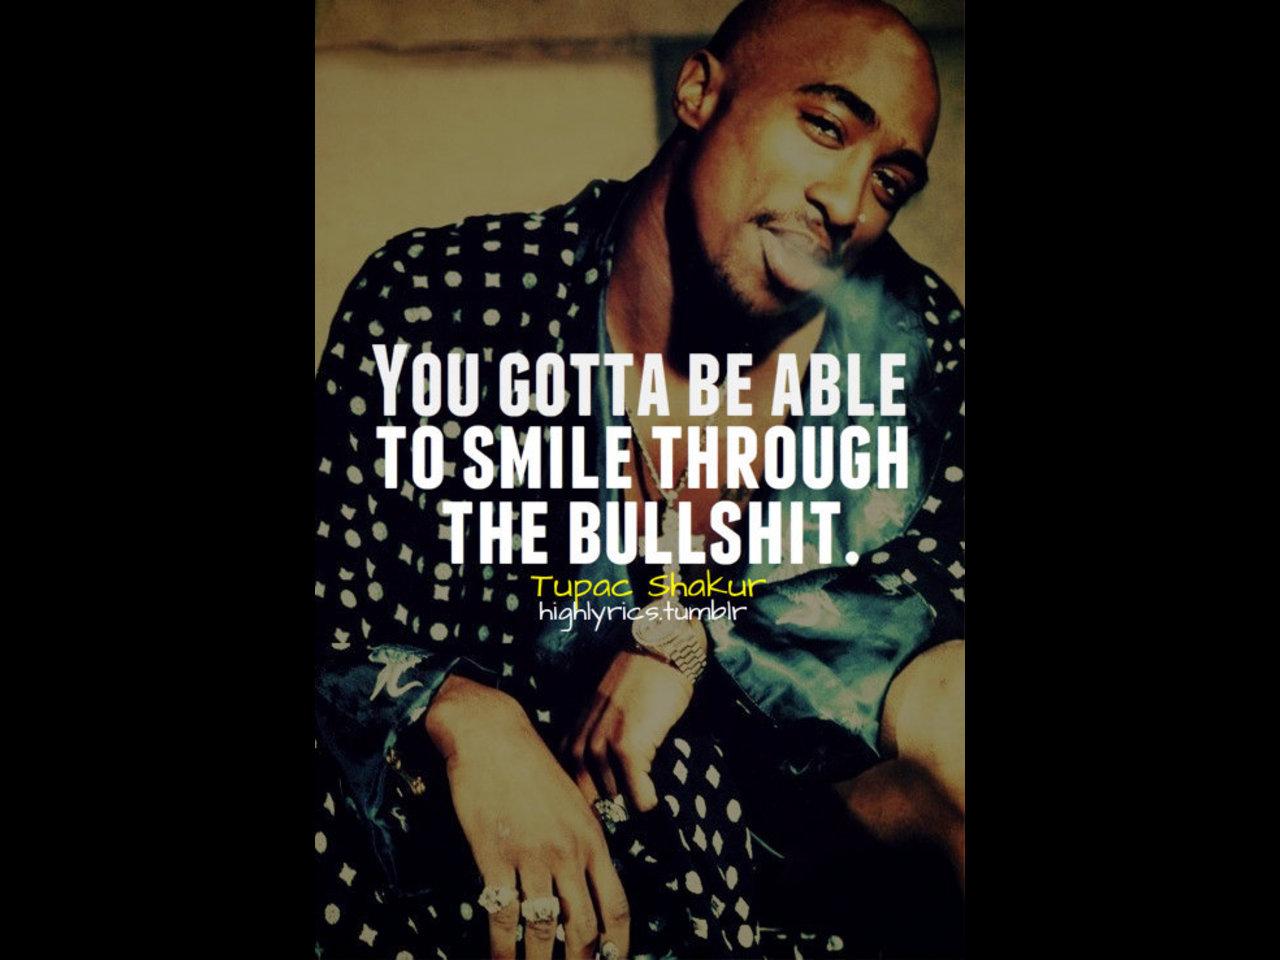 Download Tupac Wallpaper Quotes Gallery